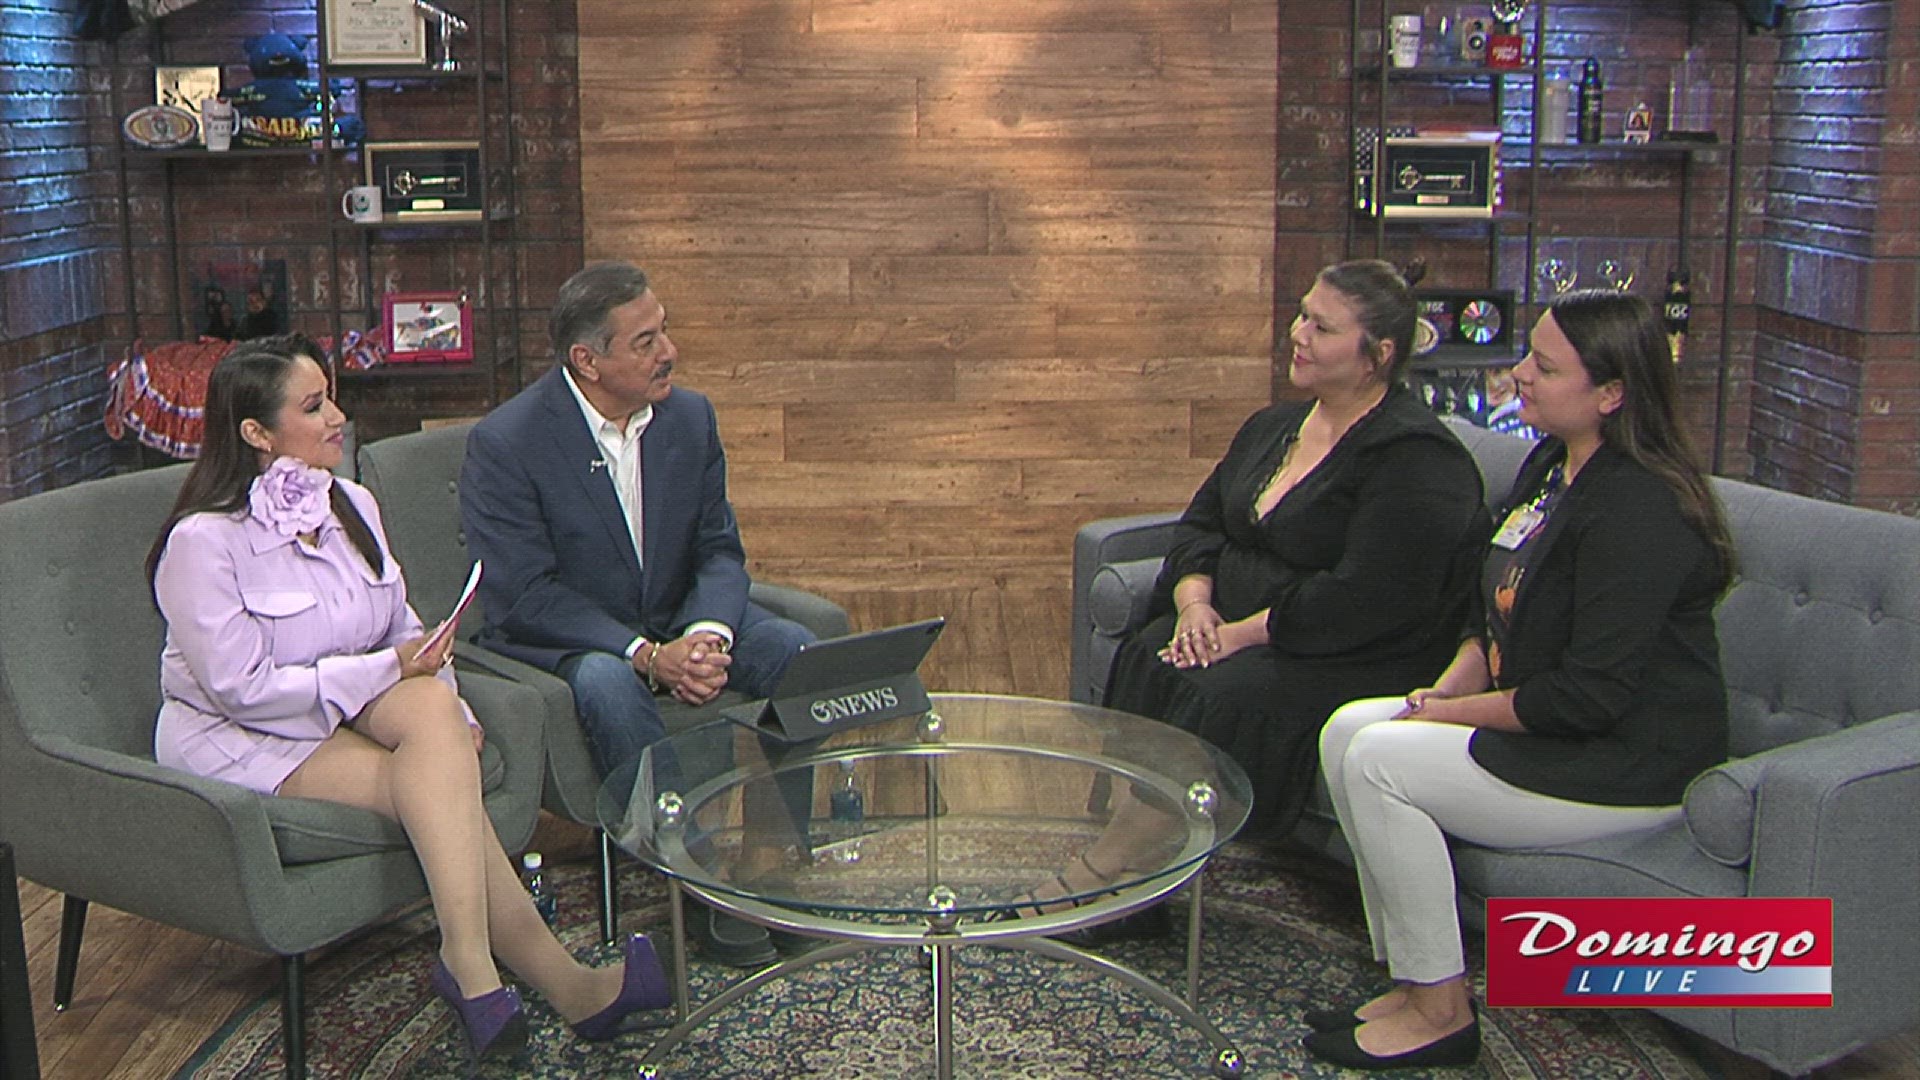 Esperanza de Tejas and Driscoll Children's Health joined us on Domingo Live to share how rural communities can take advantage of their back-to-school resources.